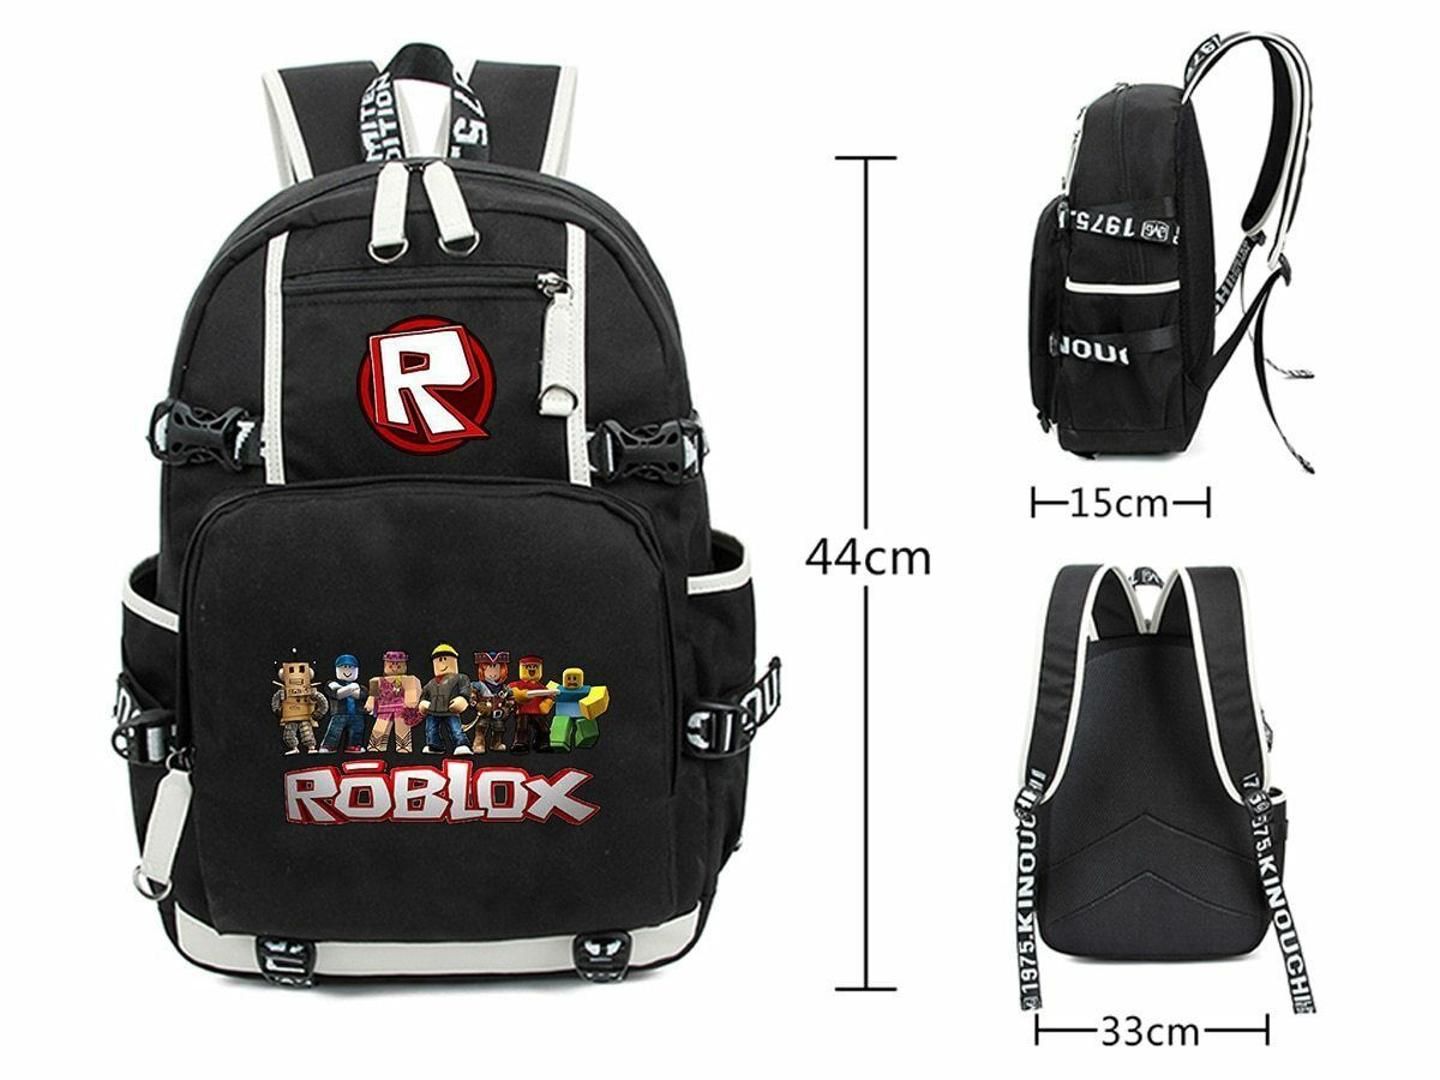 Games Roblox Backpack Black Laptop Shoulder Bags Unisex Leisure Daily Travel Bag Student School Bags Rucksack Jansport Backpacks From Trendone 28 7 Dhgate Com - details about roblox backpack kids school bag students boy handbags travelbag shoulder bags